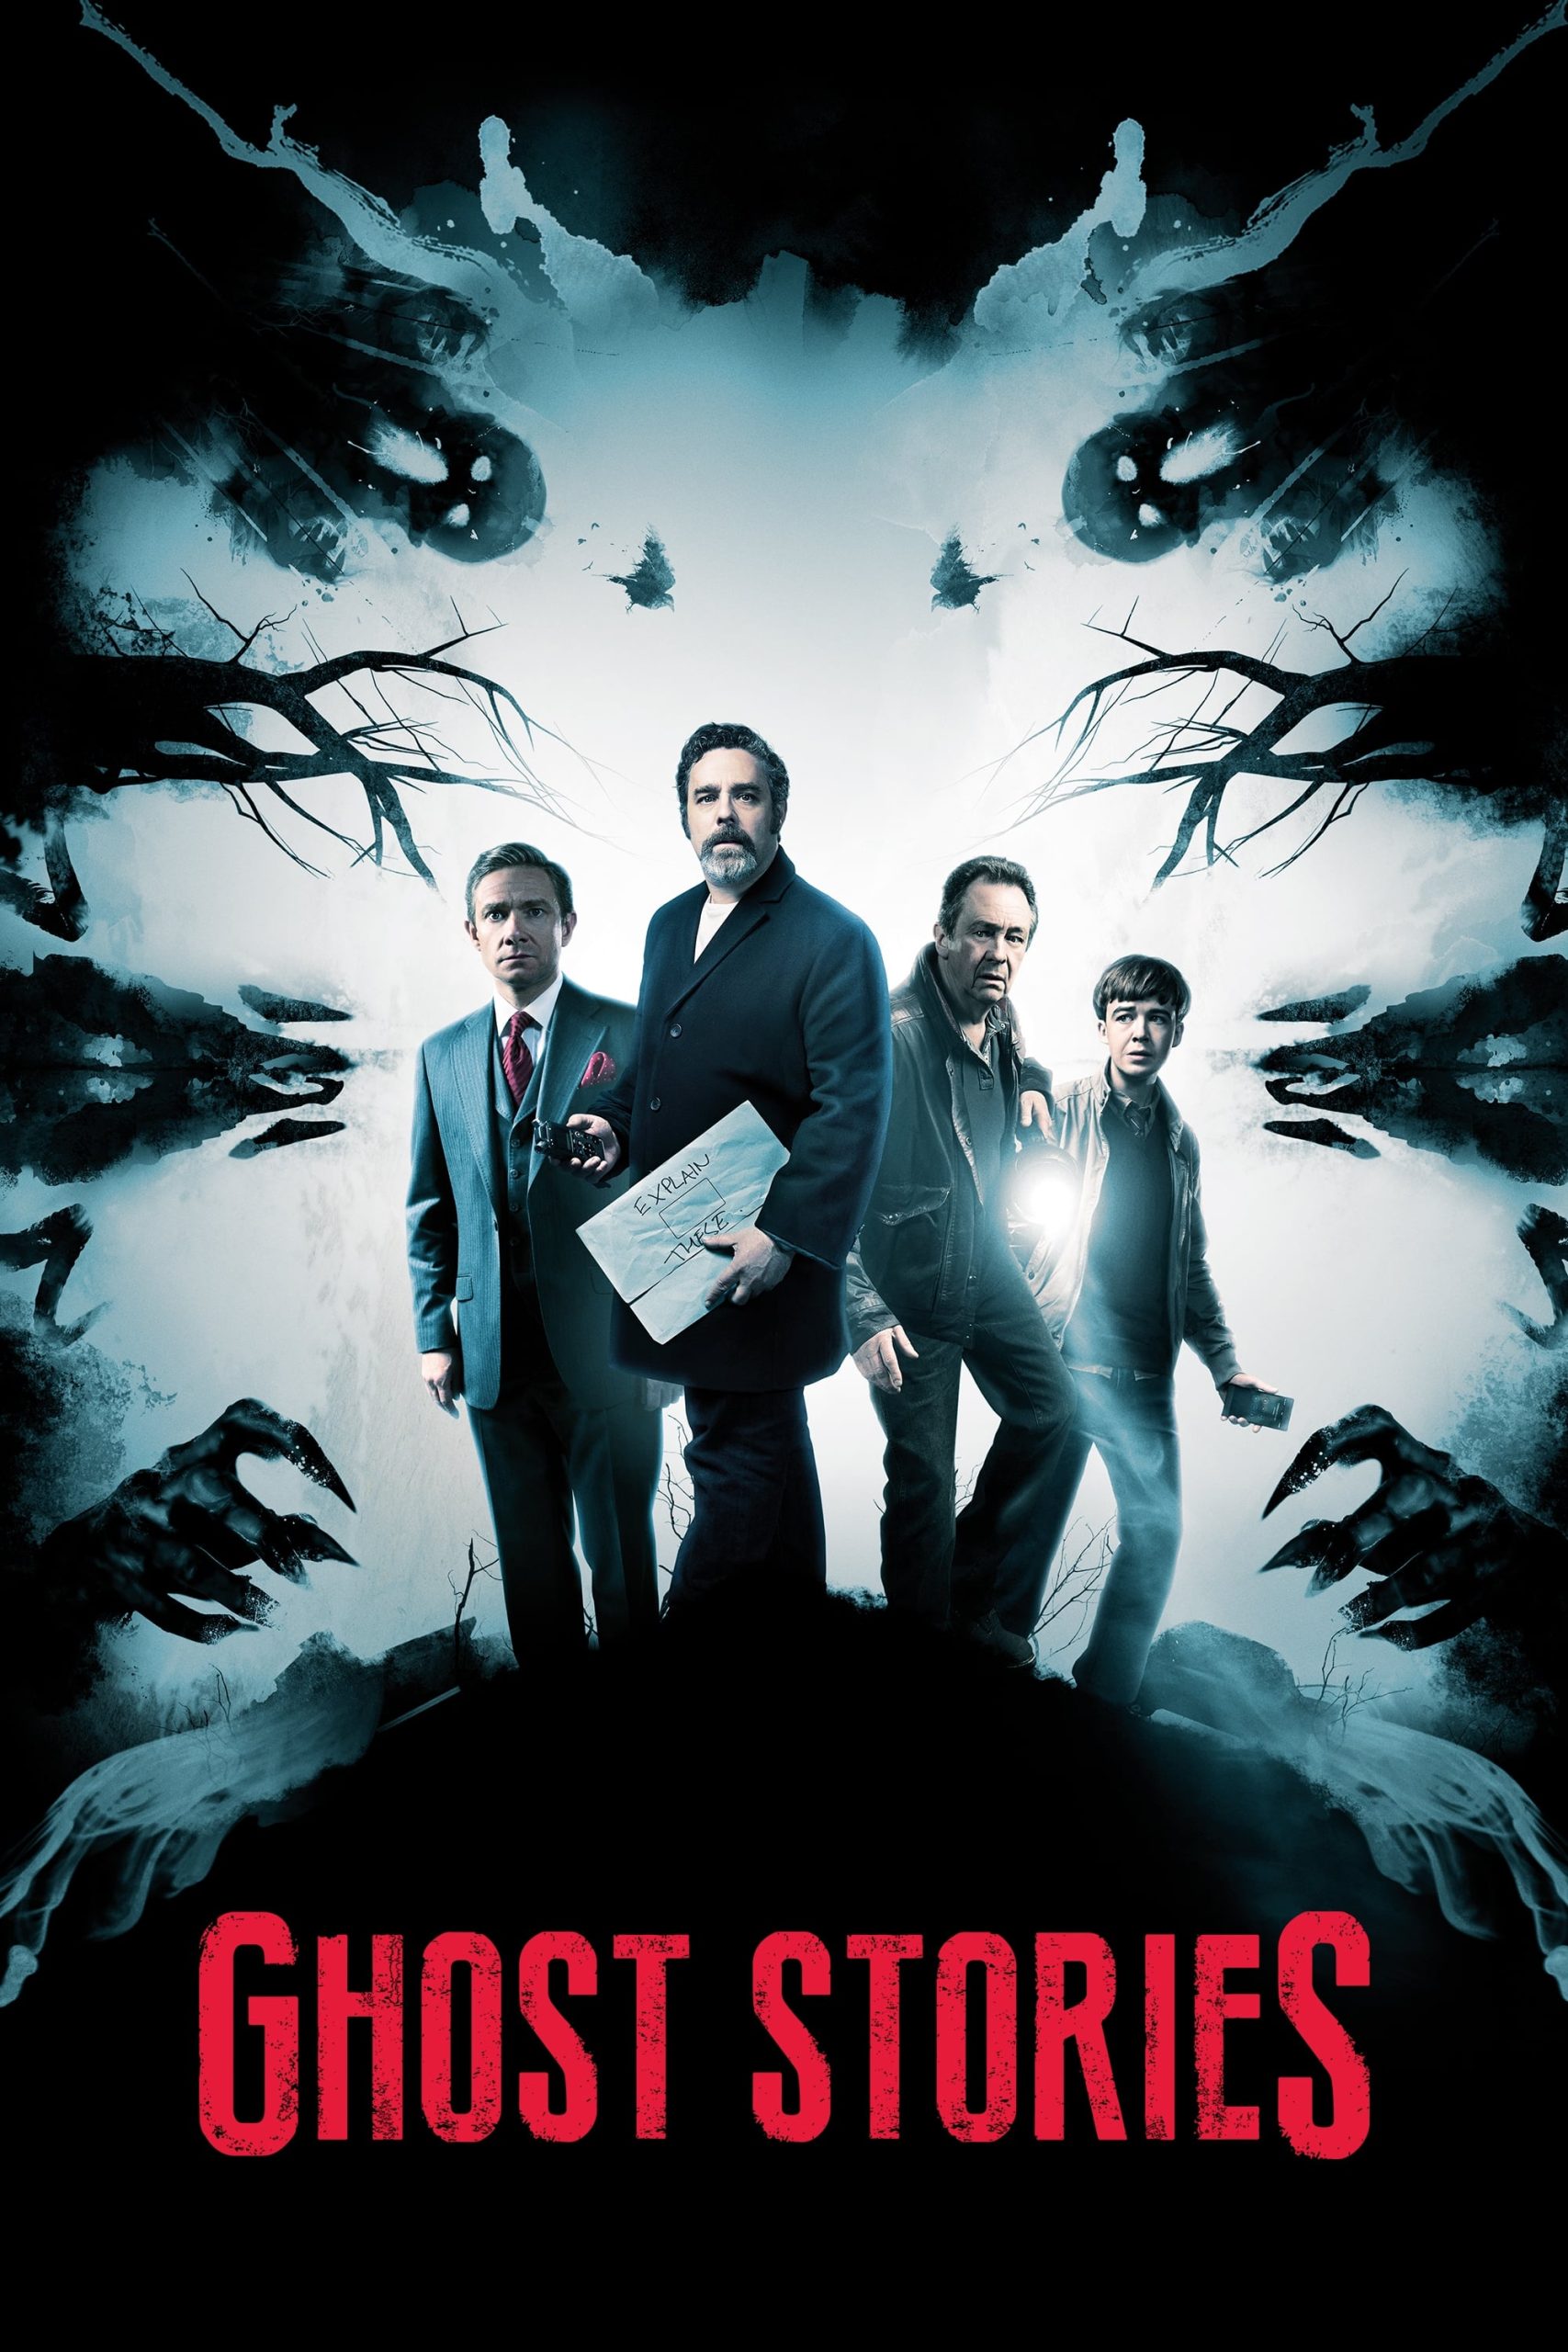 Poster for the movie "Ghost Stories"